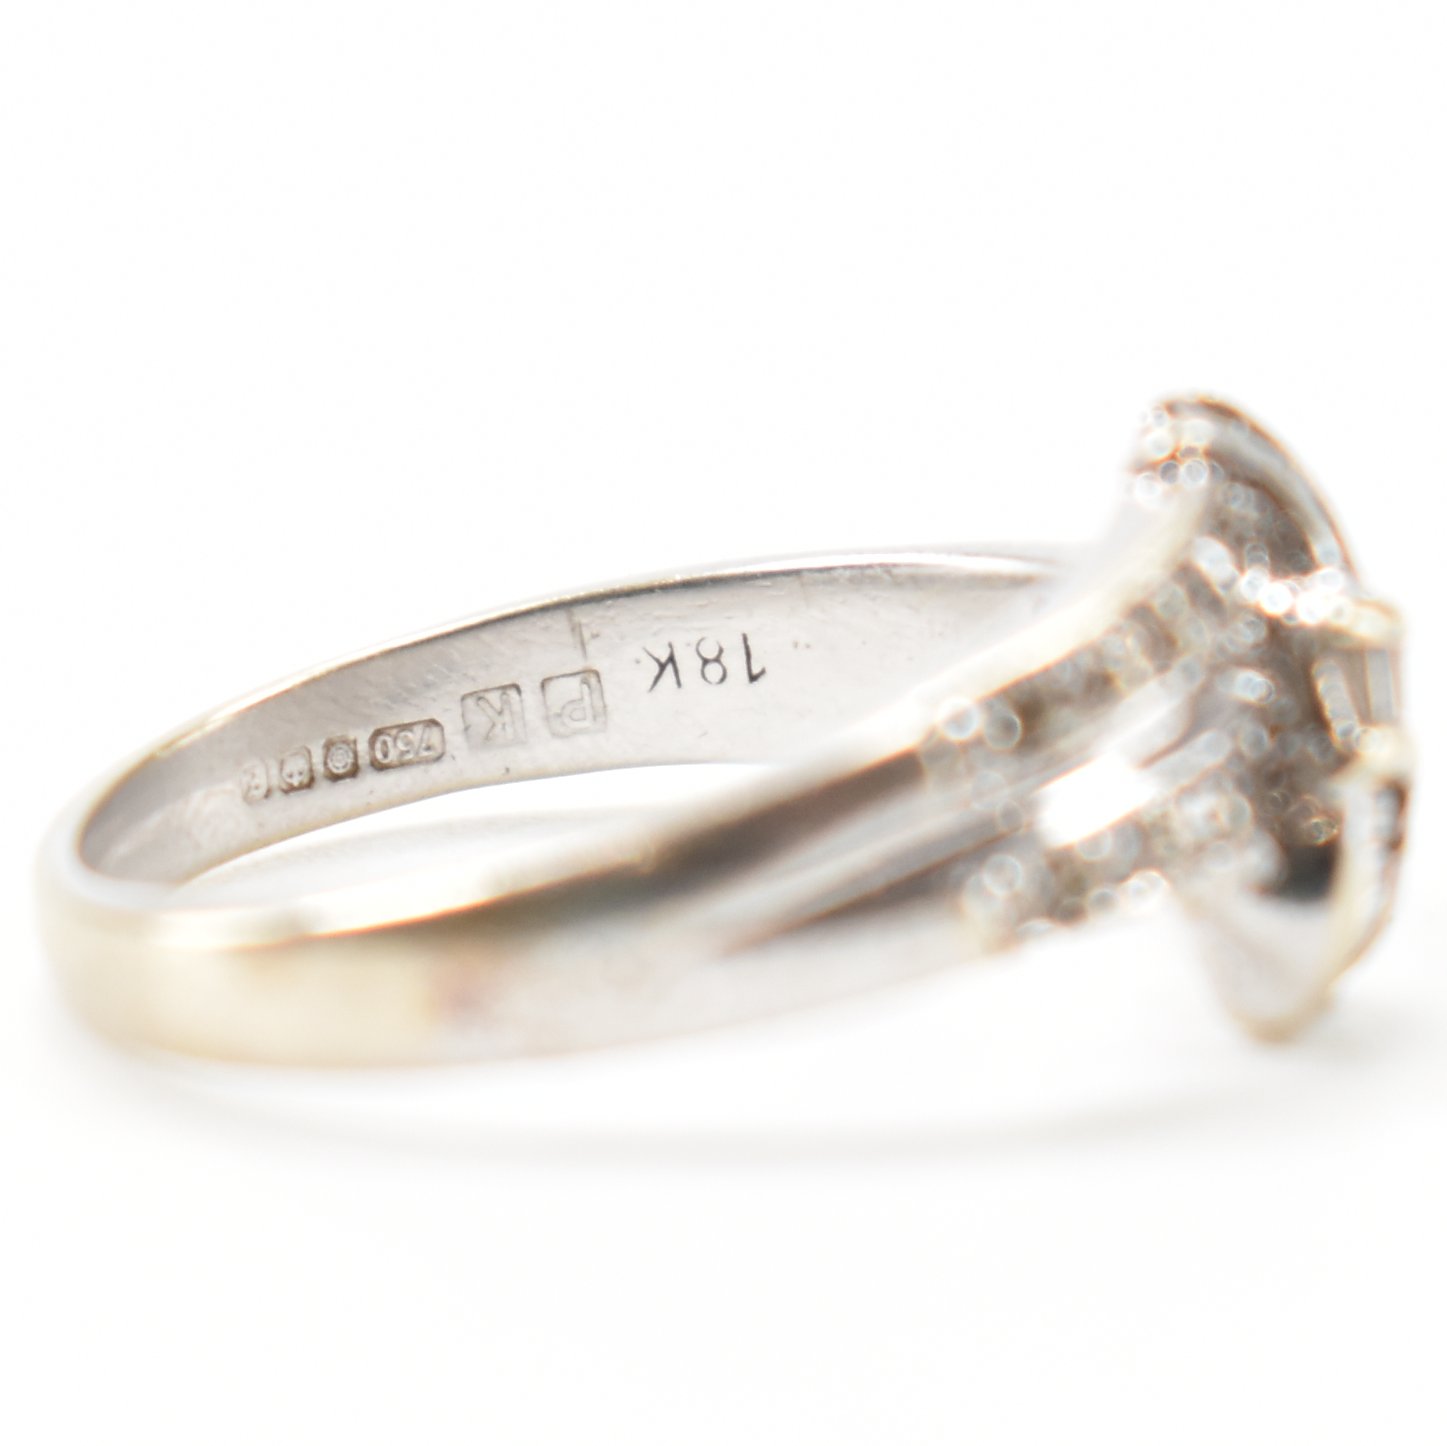 18CT GOLD & DIAMOND CROSSOVER RING - Image 6 of 9